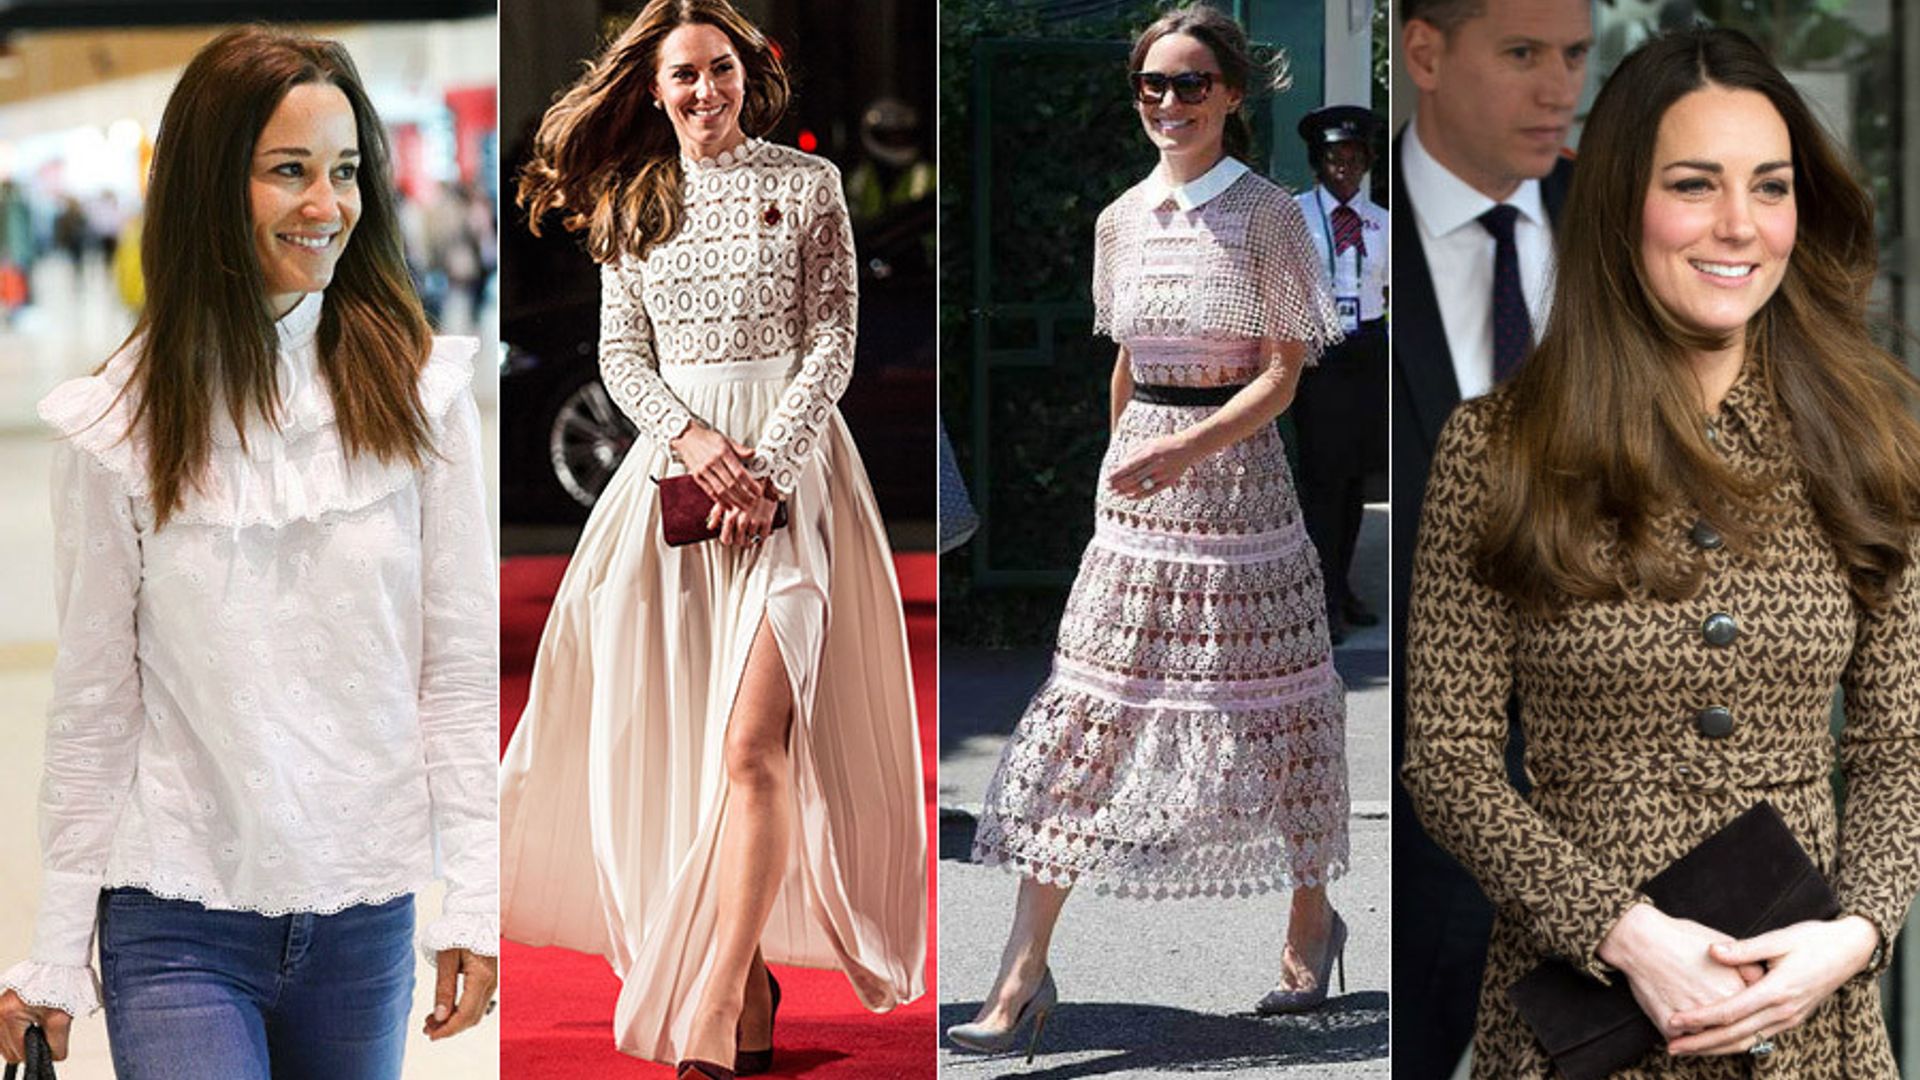 17 designers the Duchess of Cambridge and Pippa Middleton both love | HELLO!